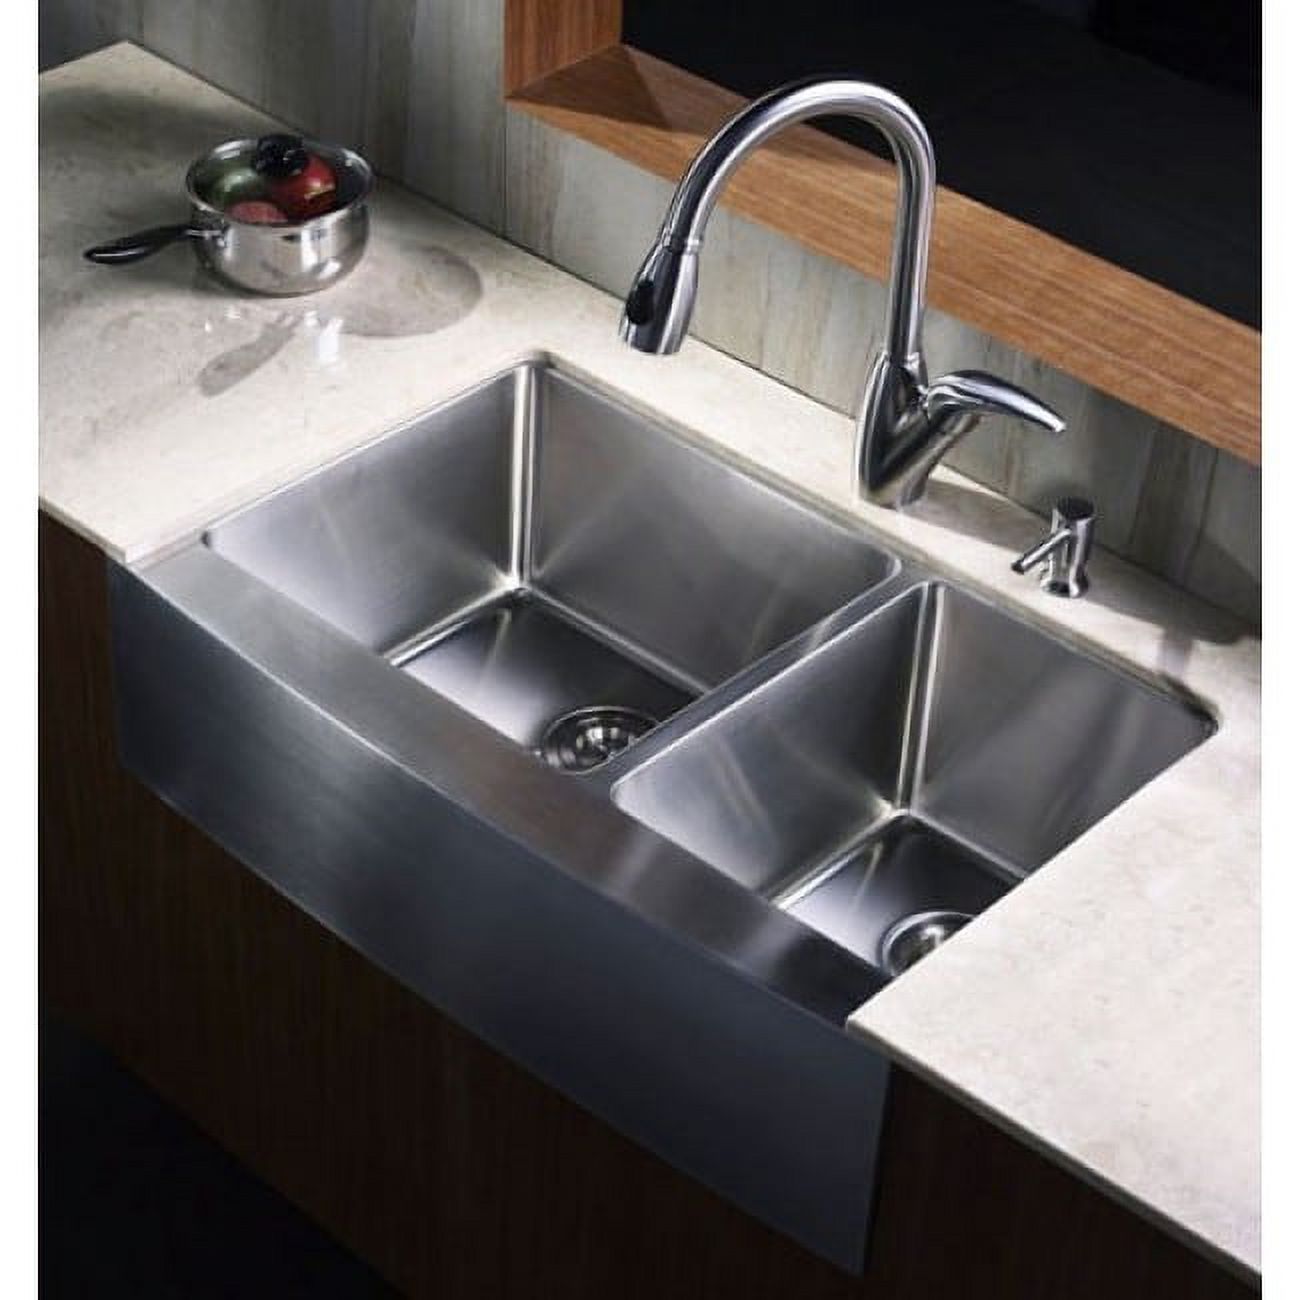 Contempo Living Inc 36-inch 15mm Curved Front Farm Apron 60/40 Double Bowl Kitchen Sink - image 5 of 5